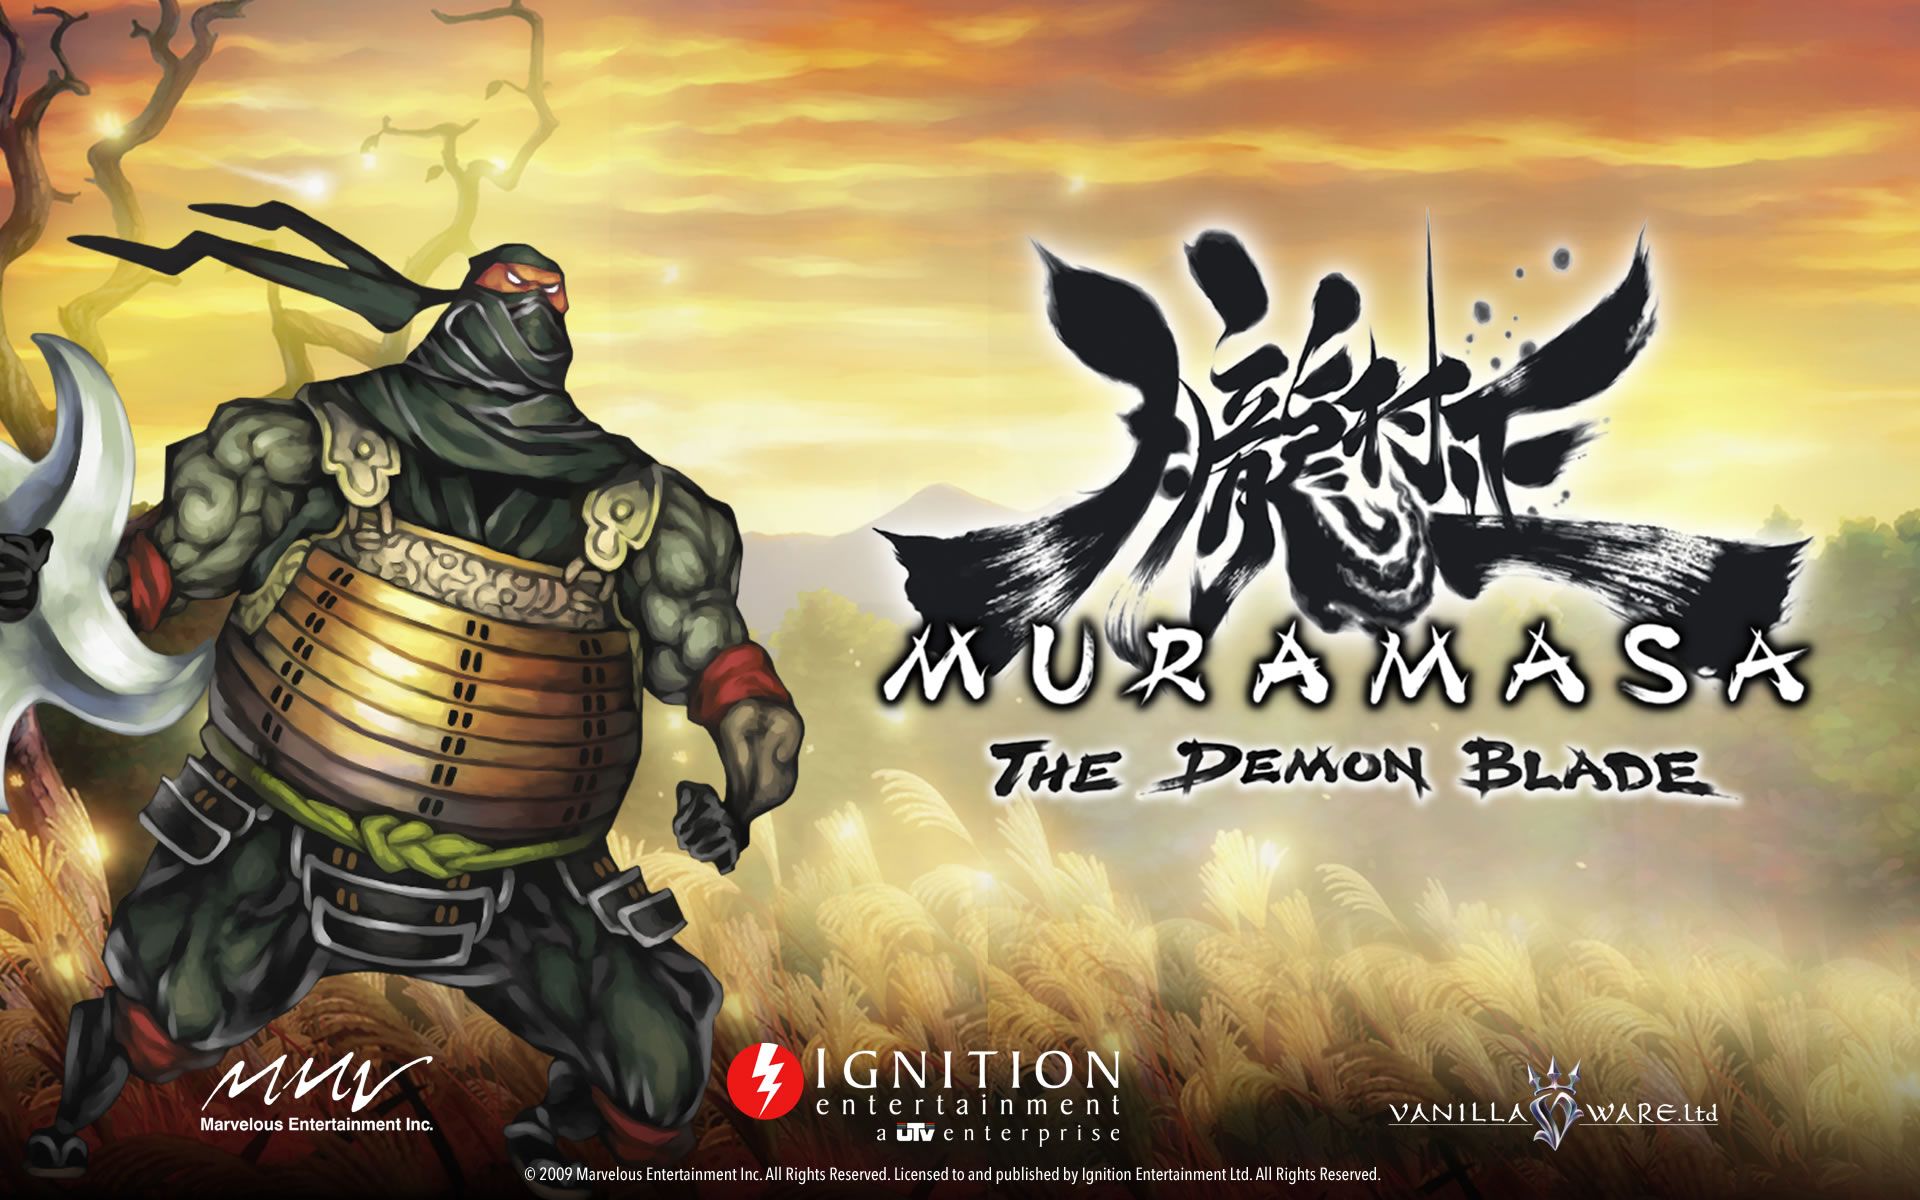 Muramasa The Demon Blade screenshots, images and pictures - Giant